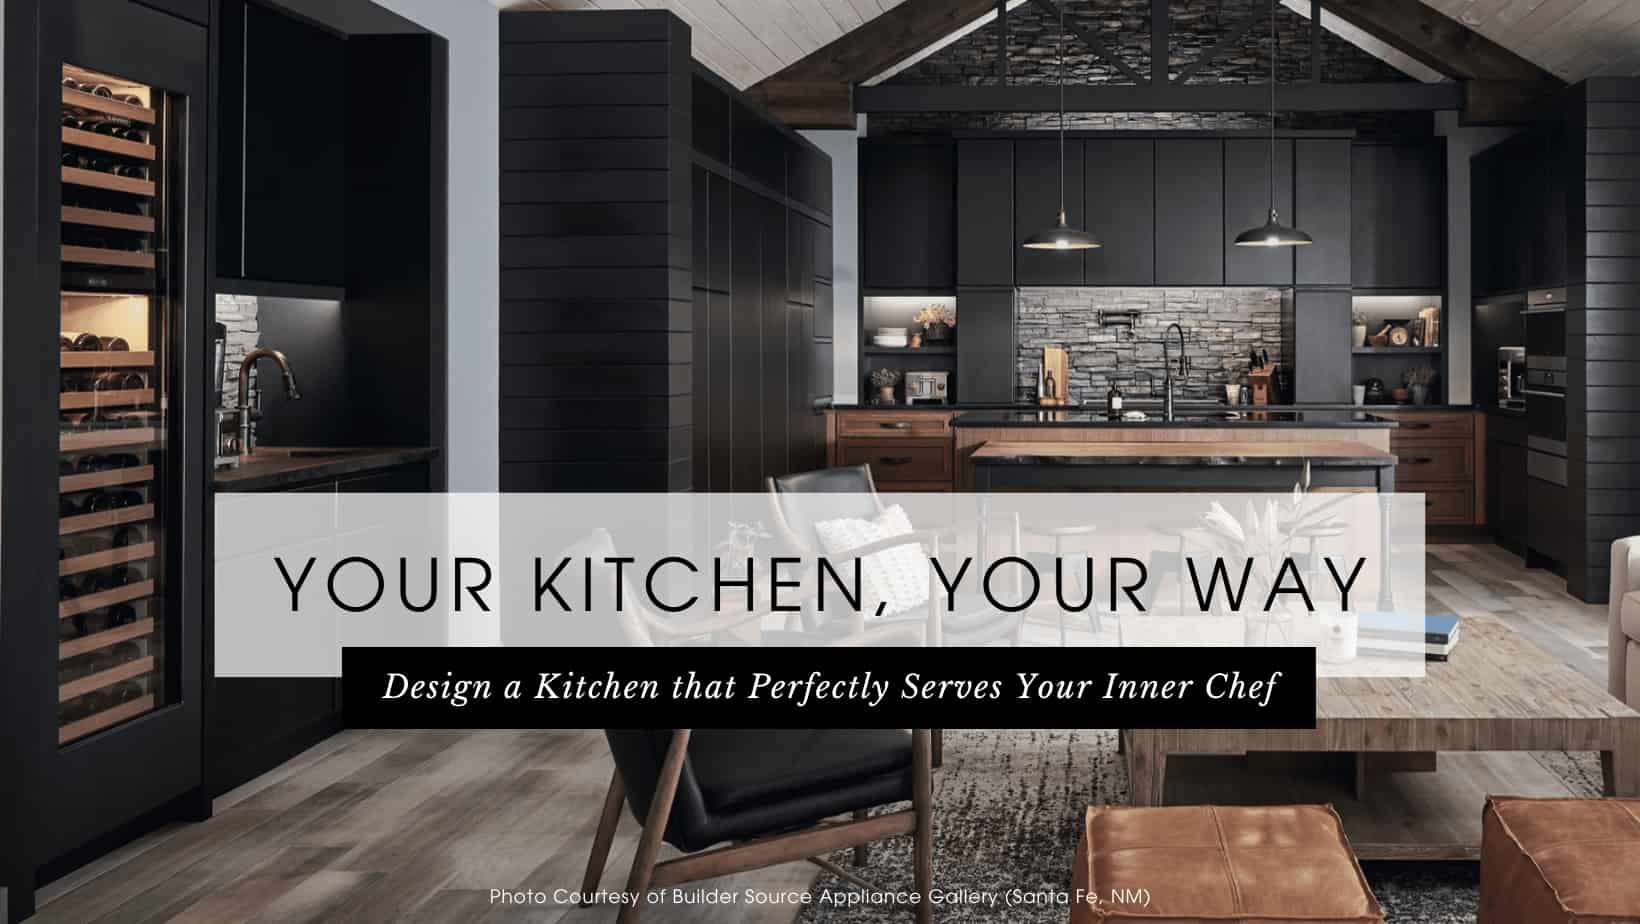 Kitchen Designs to Bring Out Your Inner Chef